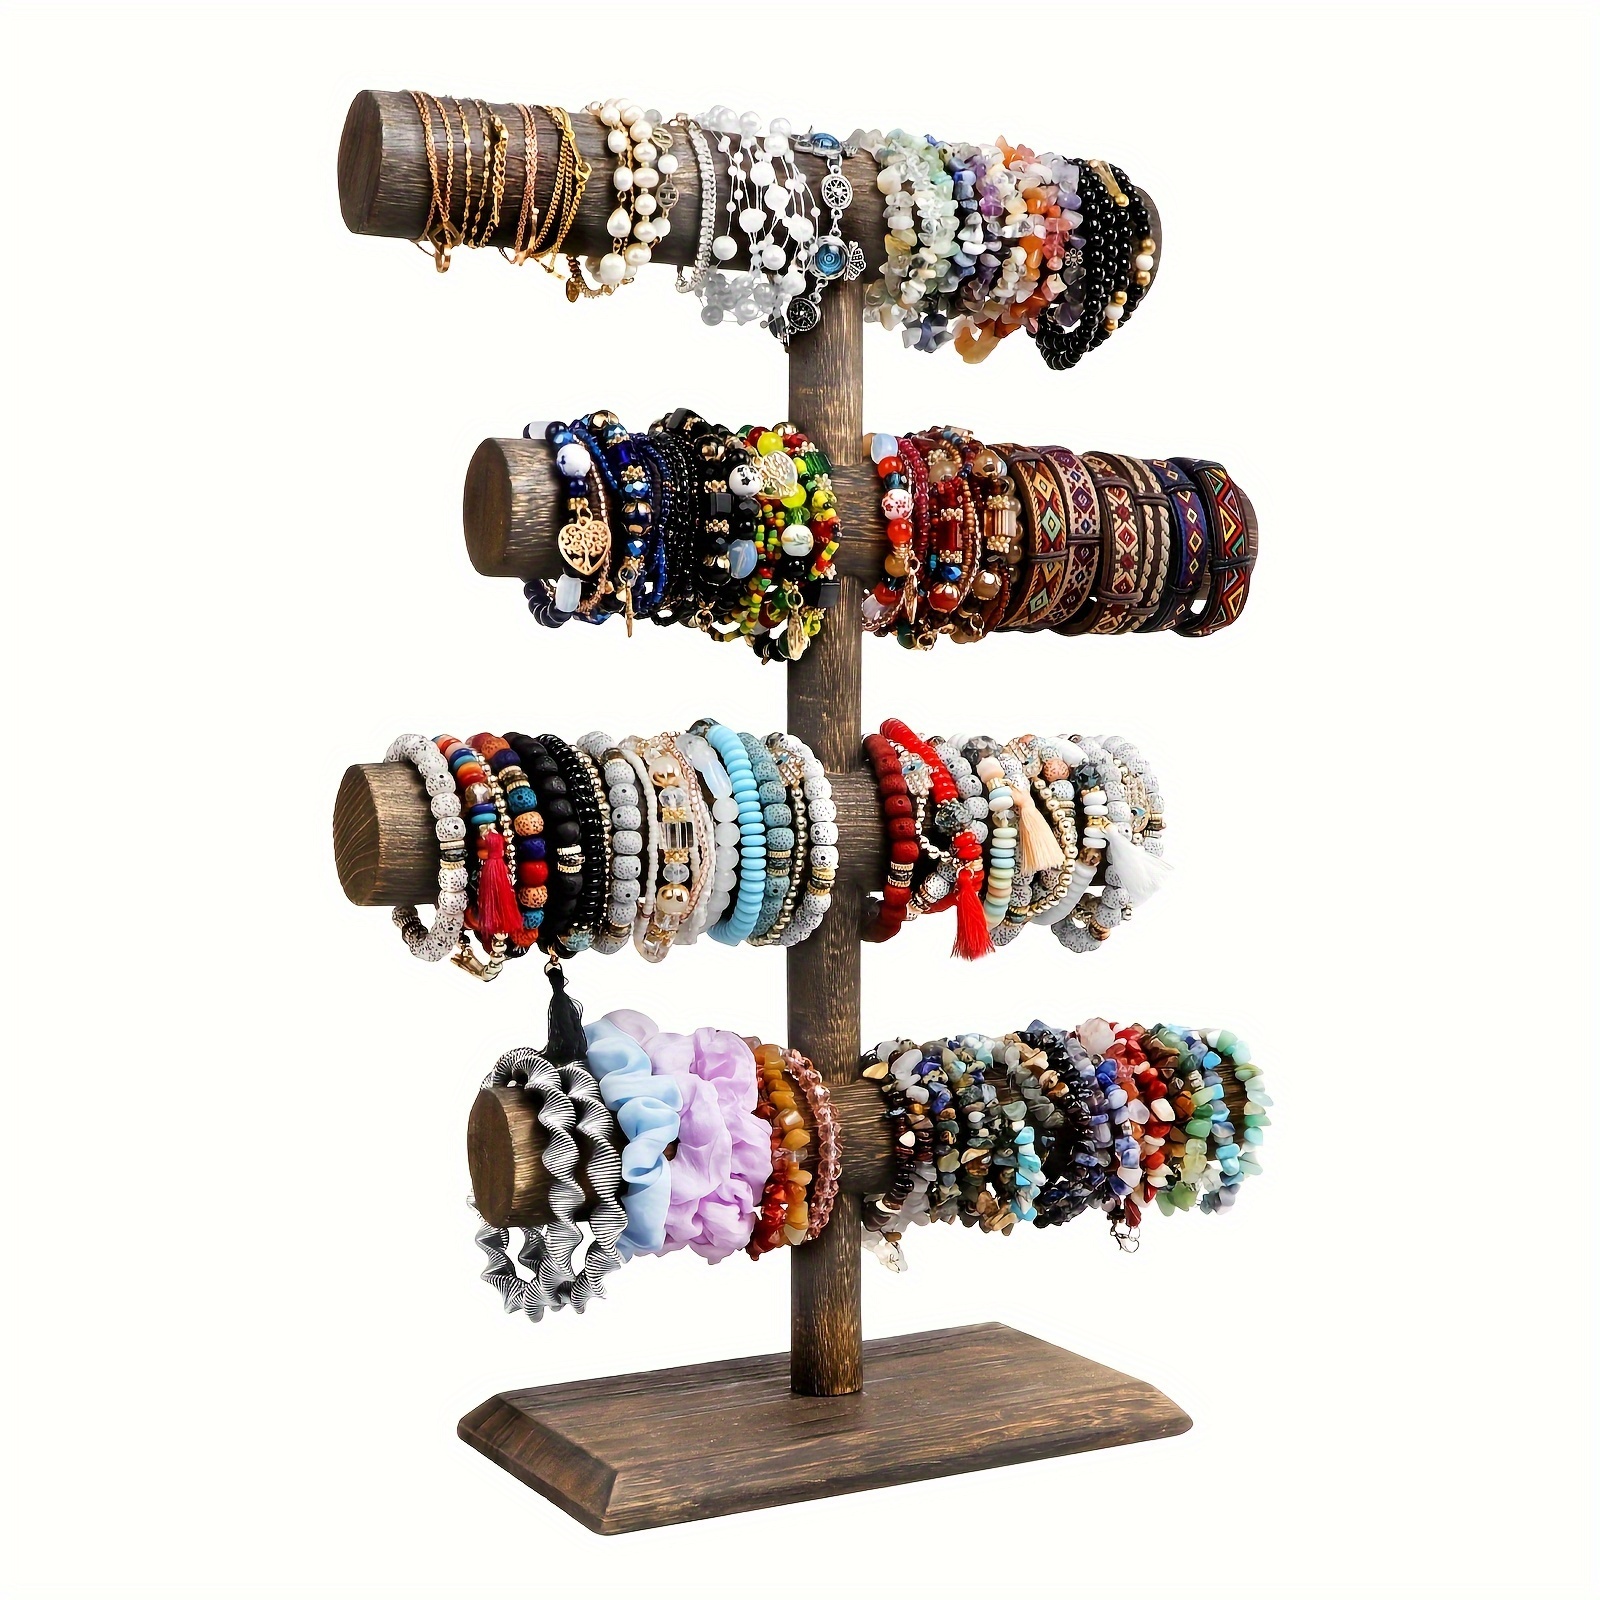 

4 Tier Wooden Display Jewelry Accessory Stand Bracelet Holder Bangle, Mother's Day Gift